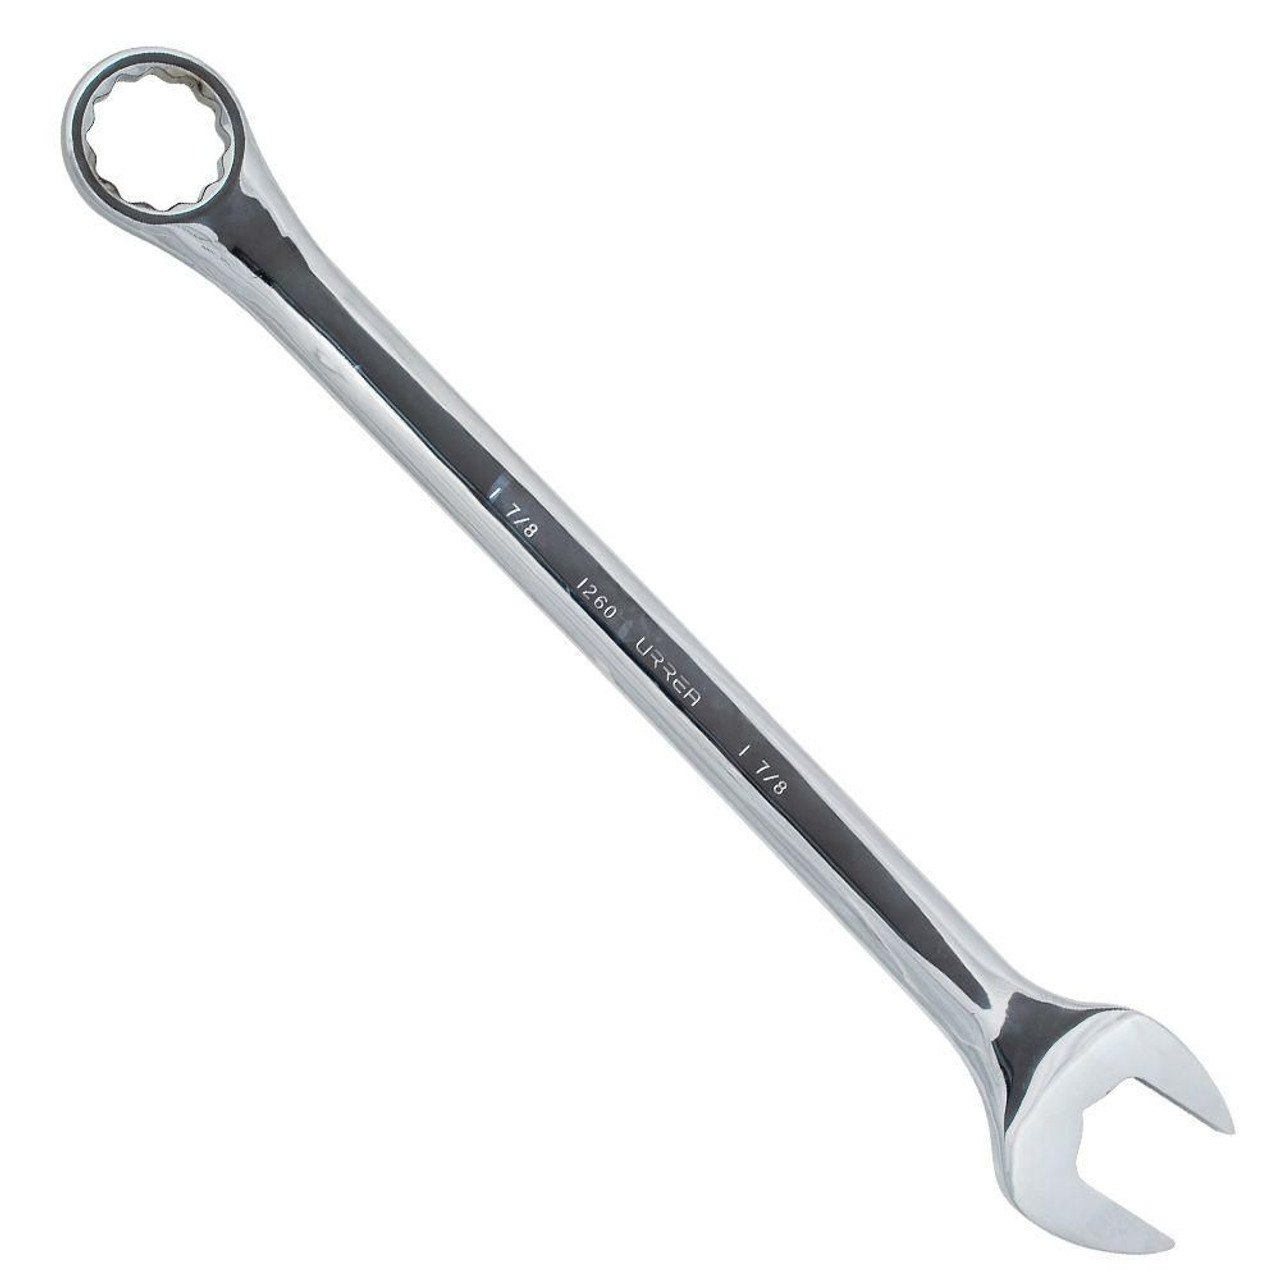 Full polished combination wrench, Size: 1-1/4, 12 point, Tool Length:&nbsp;16-7/8"